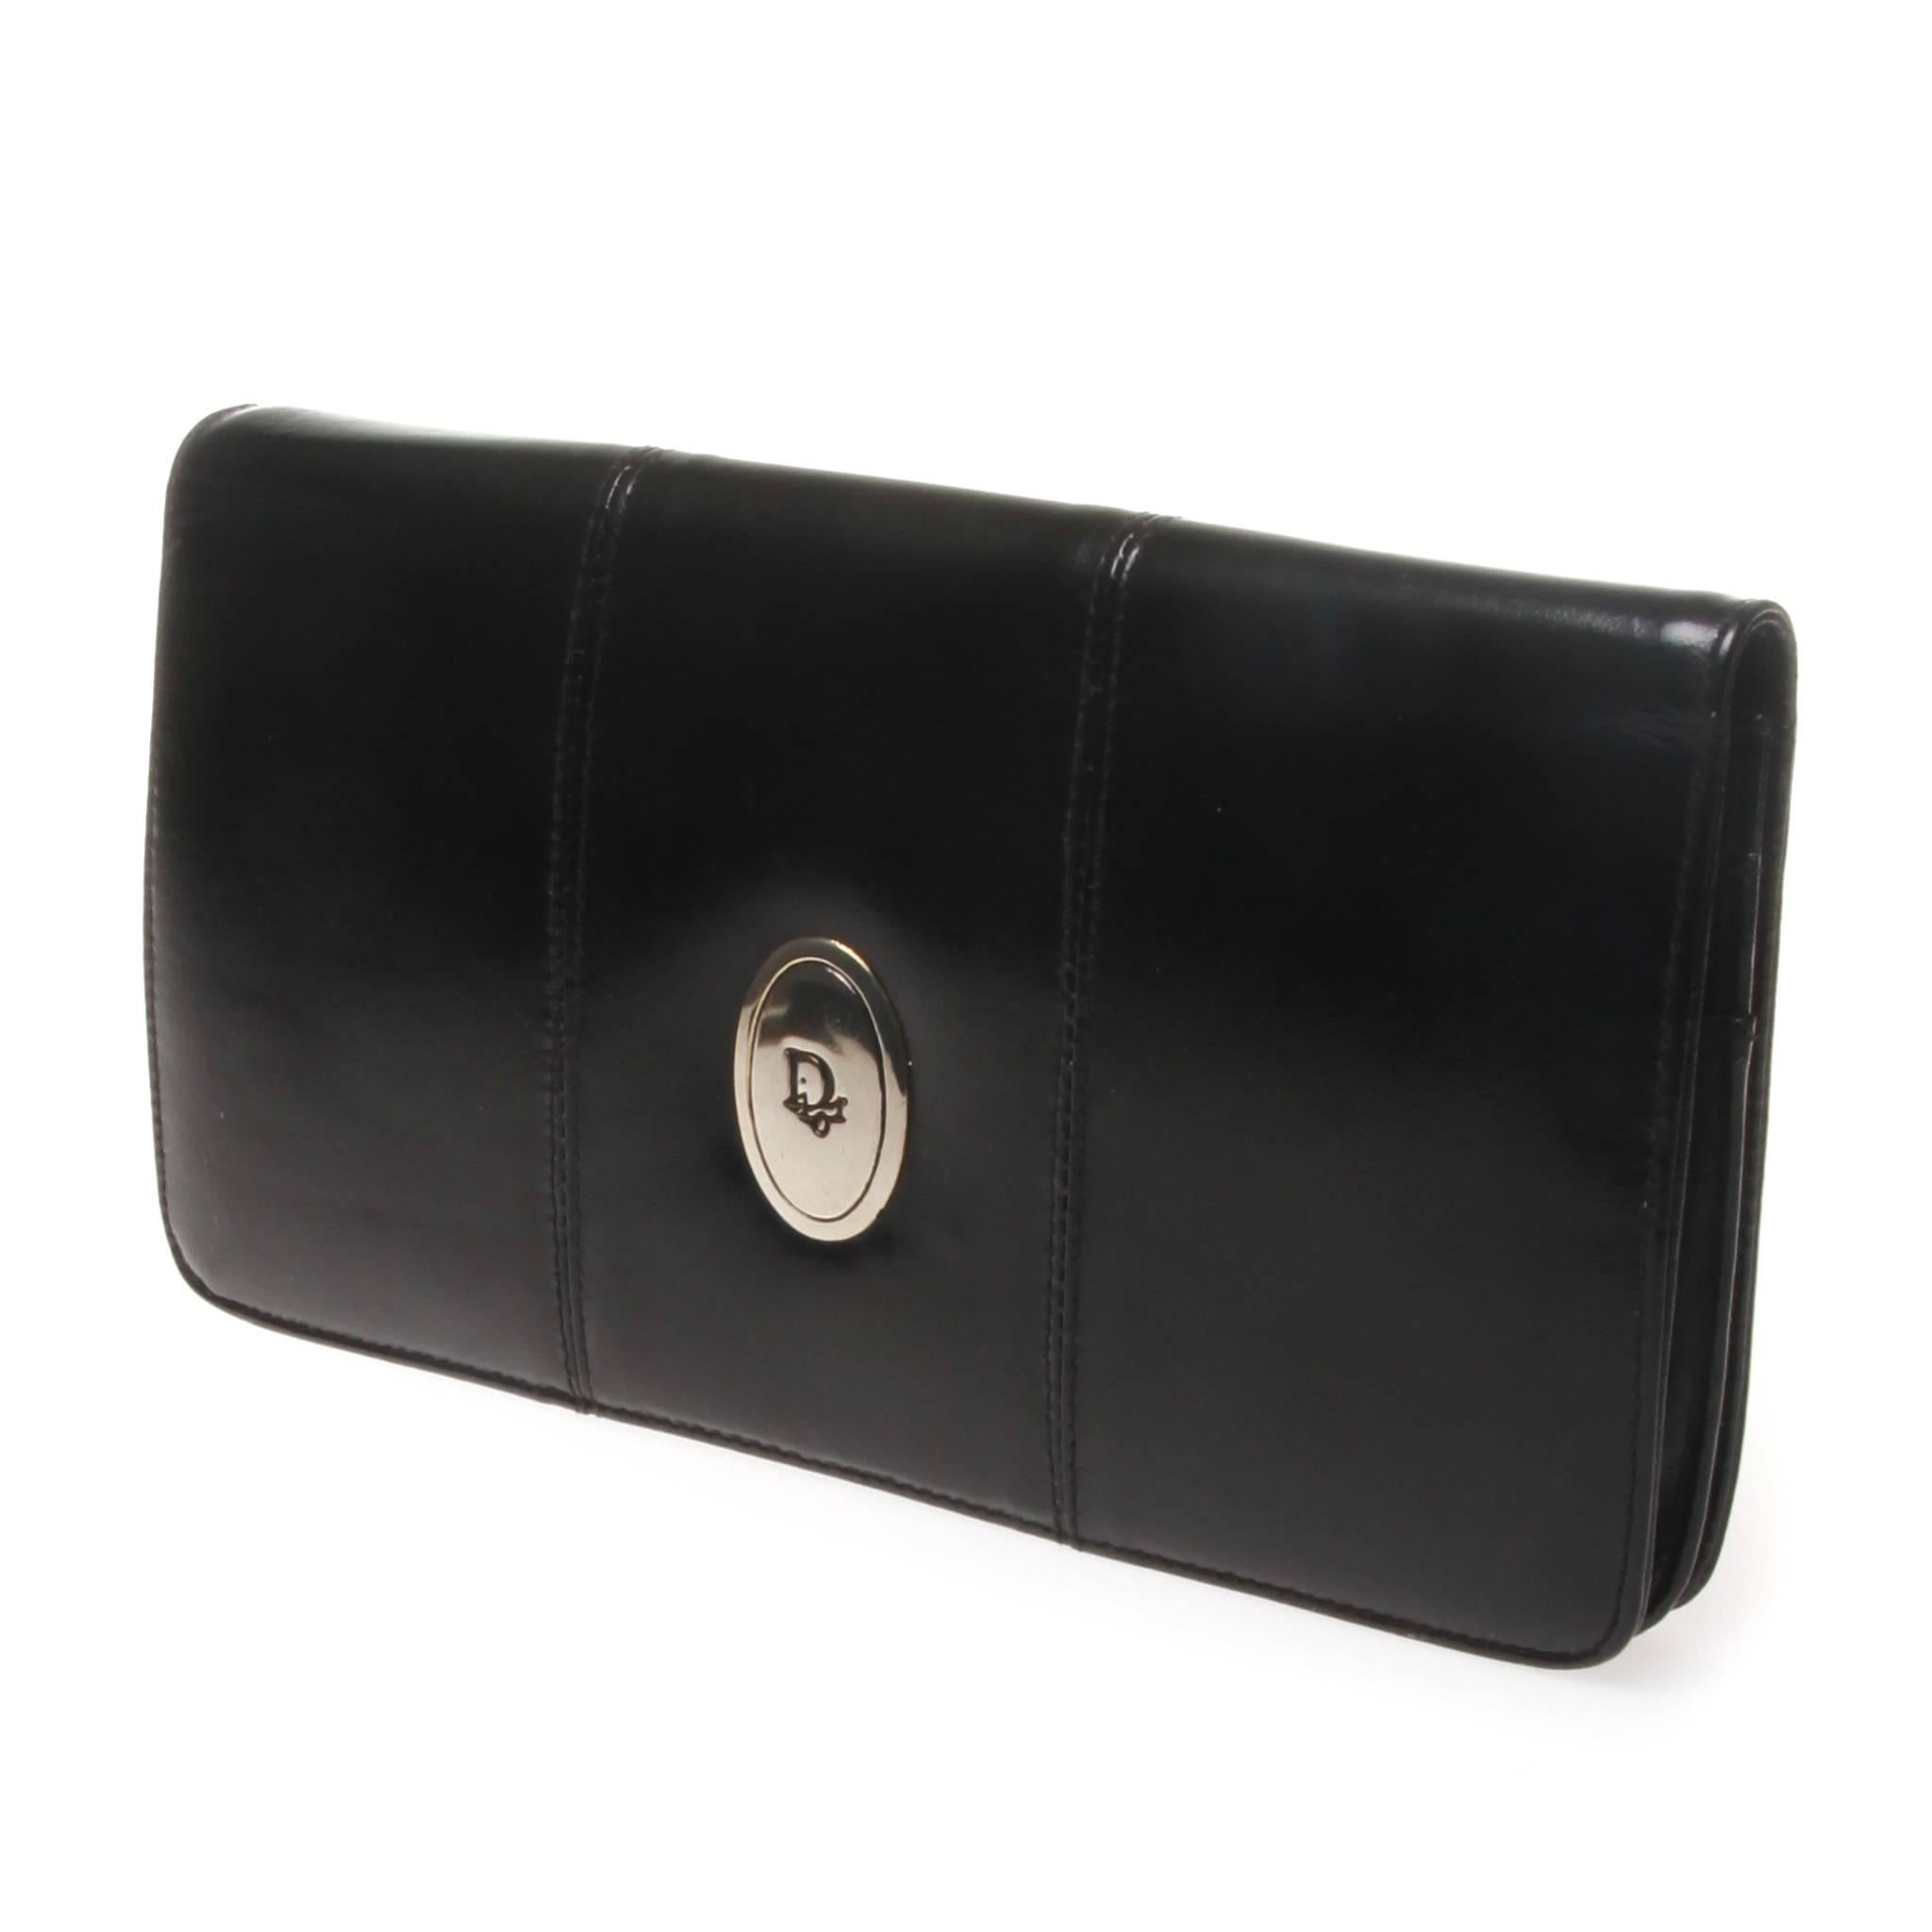 Christian Dior black leather clutch walter with 'Dior' plaque in silver on the front. Inside there is one main pocket with two sewn in pockets, one with a zip. There are also two other compartments one fastened with a clip for coins and one with a